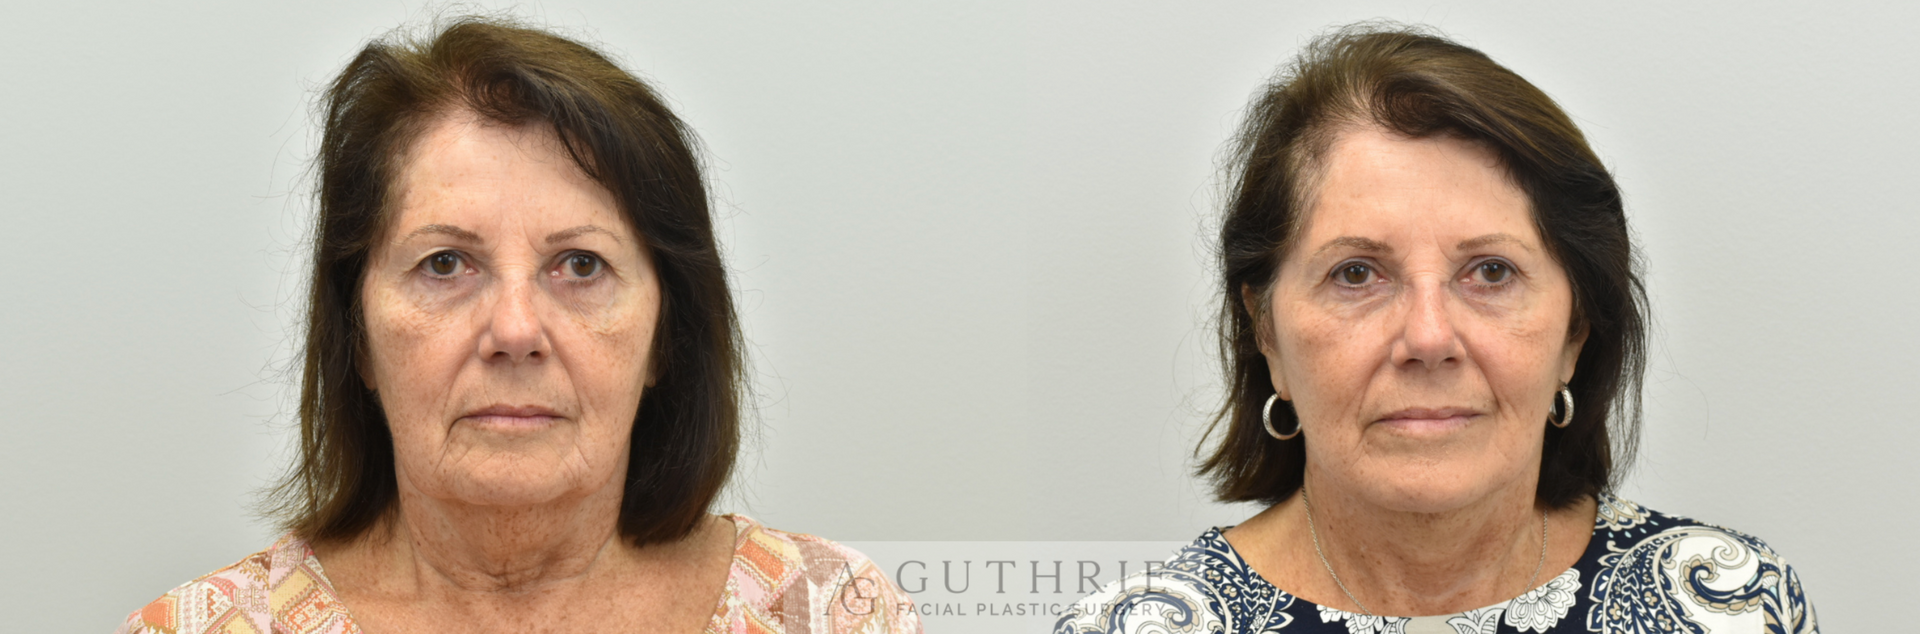 Before and After Facelift, Upper Blepharoplasty, Endoscopic Brow Lift, CO2 Laser